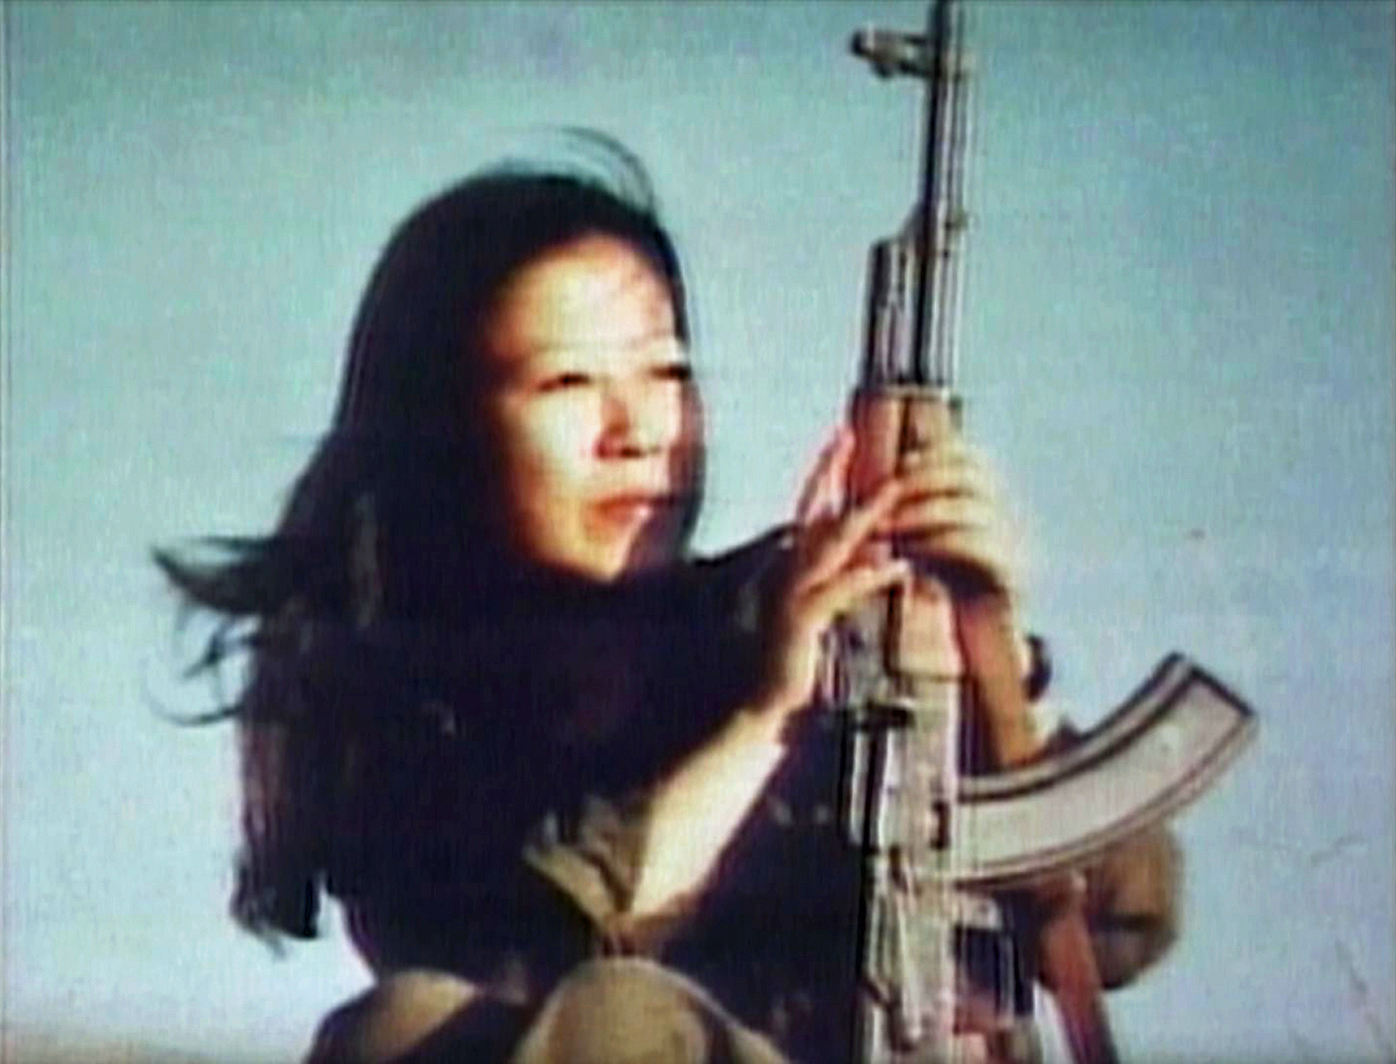 Japanese Red Army founder Fusako Shigenobu, shown here in the documentary 'Children of the Revolution,' spent nearly 30 years in hiding before being arrested in 2000. | &#169; TRANSMISSION FILMS 2011